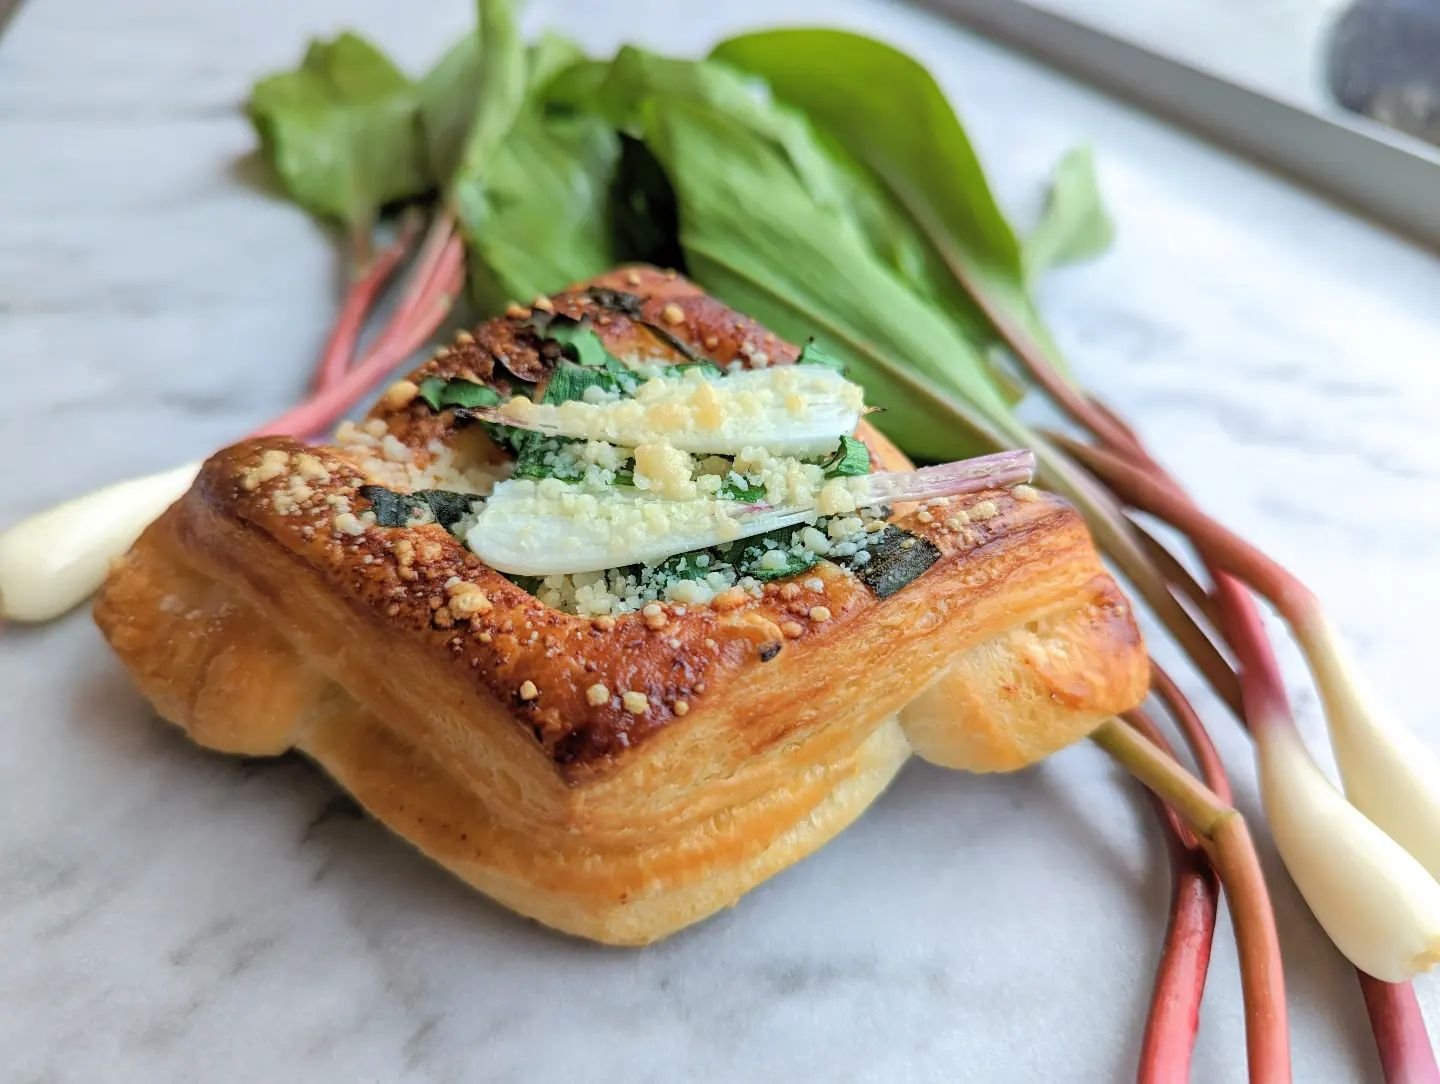 Ramp parmesan croissants are here!!!

We're pretty excited about this. Not just because they're delicious (they are), but because it means that summer is truly on the way. Ramps are some of the first bit of growth in Michigan wilderness, blanketing t